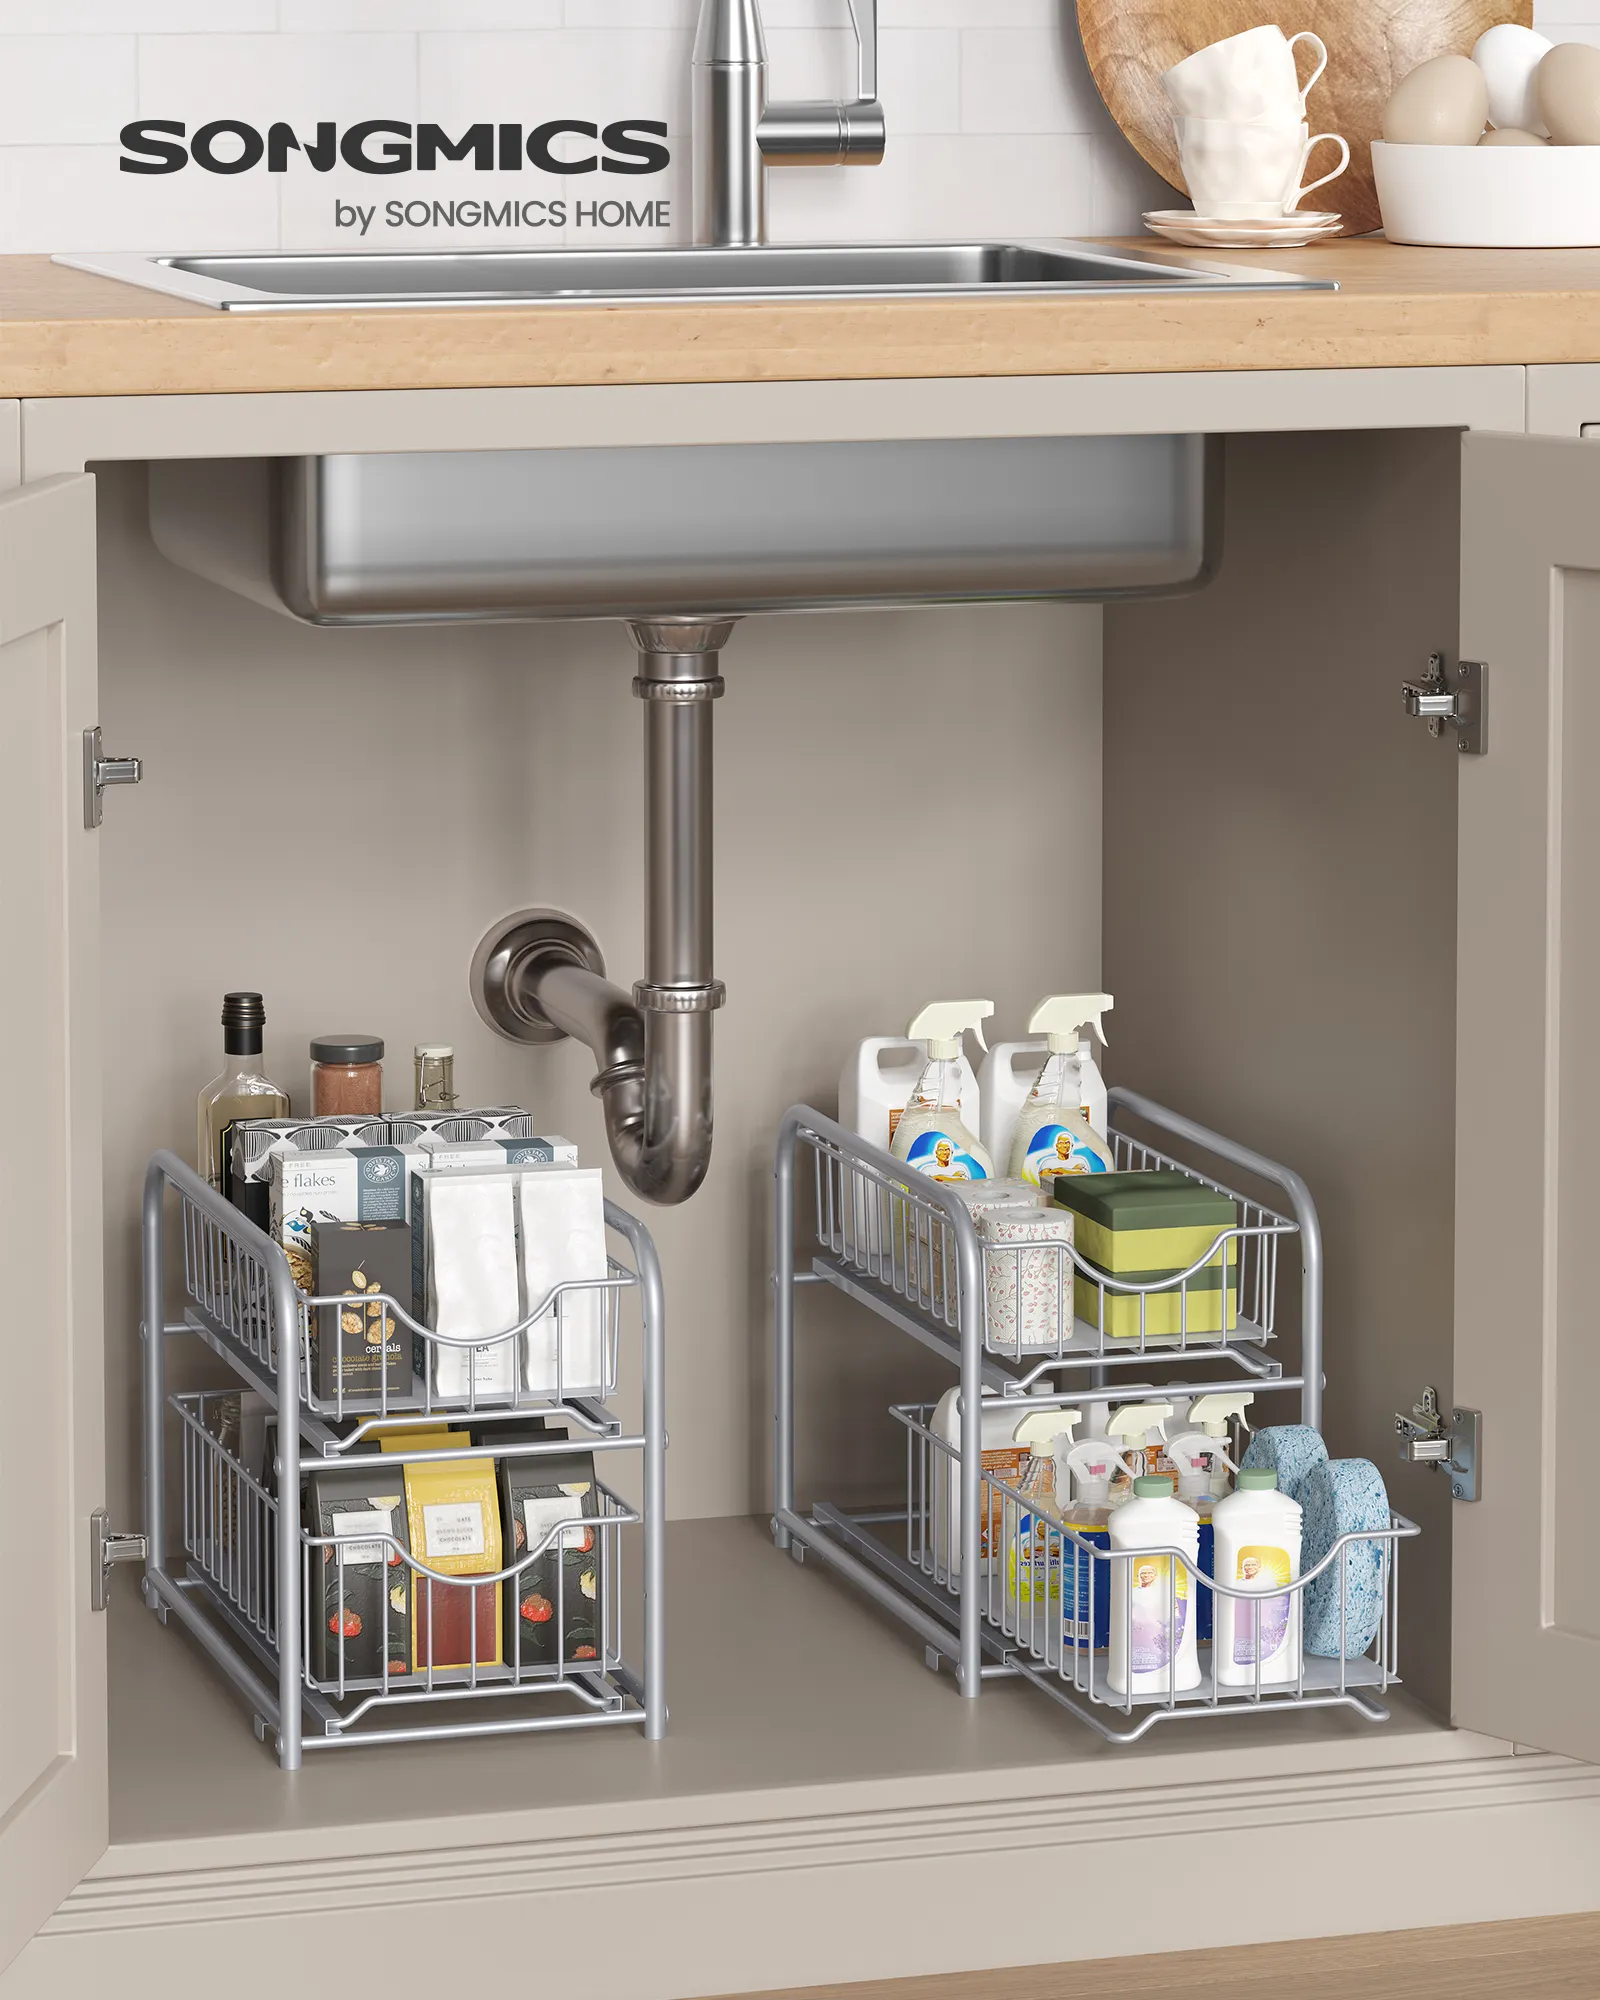 SONGMICS 2 Pull-Out Drawers for kitchen cabinet organizer and storage plate rack under sink organizers and storage